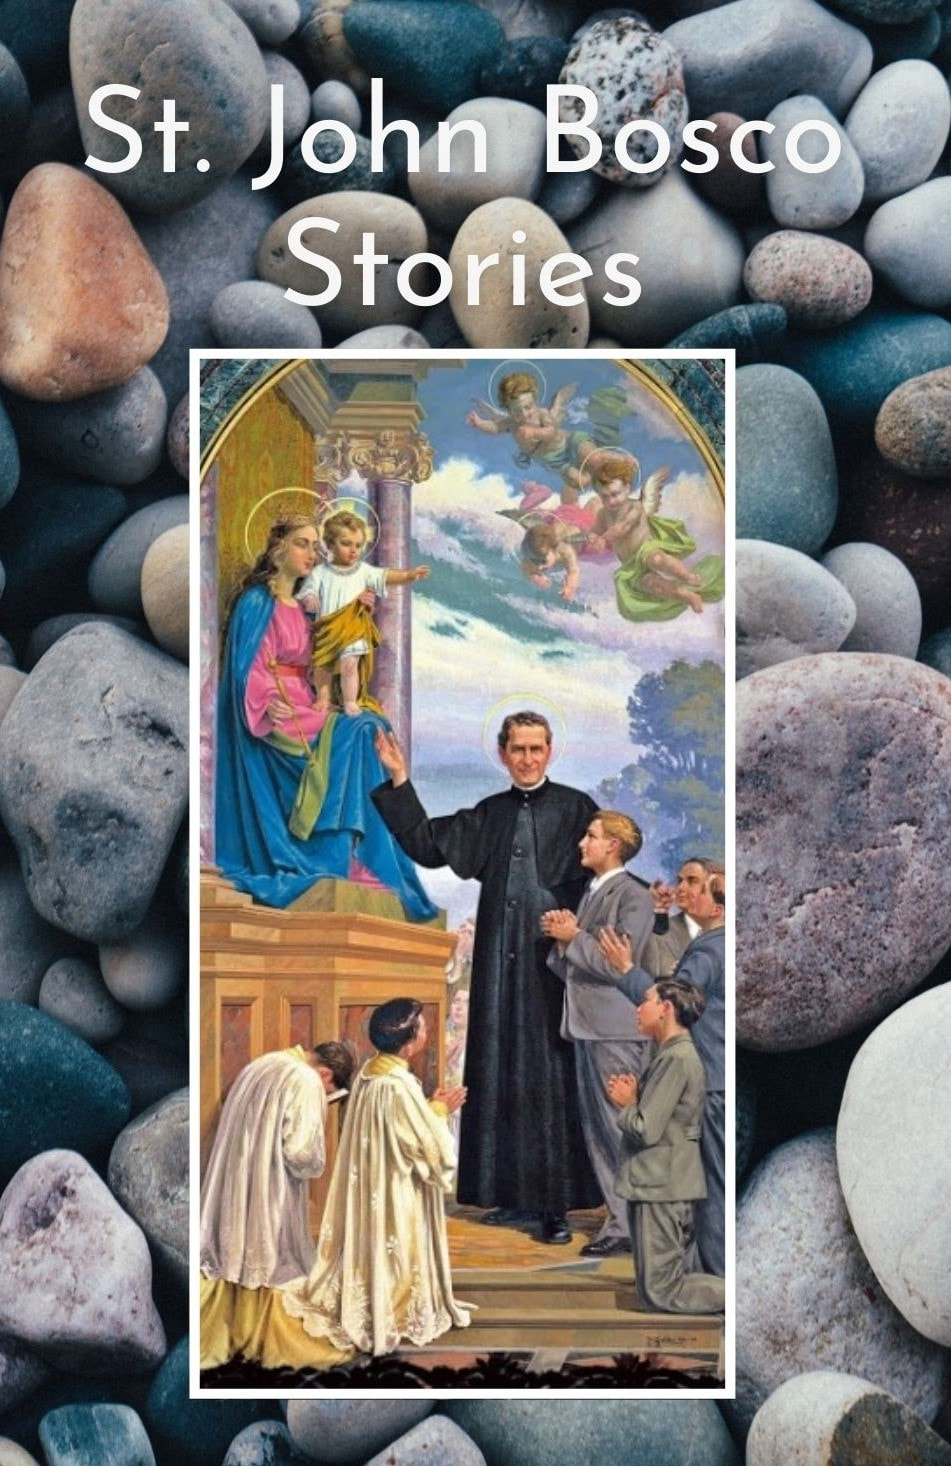 St John Bosco Stories St Jerome School And Library